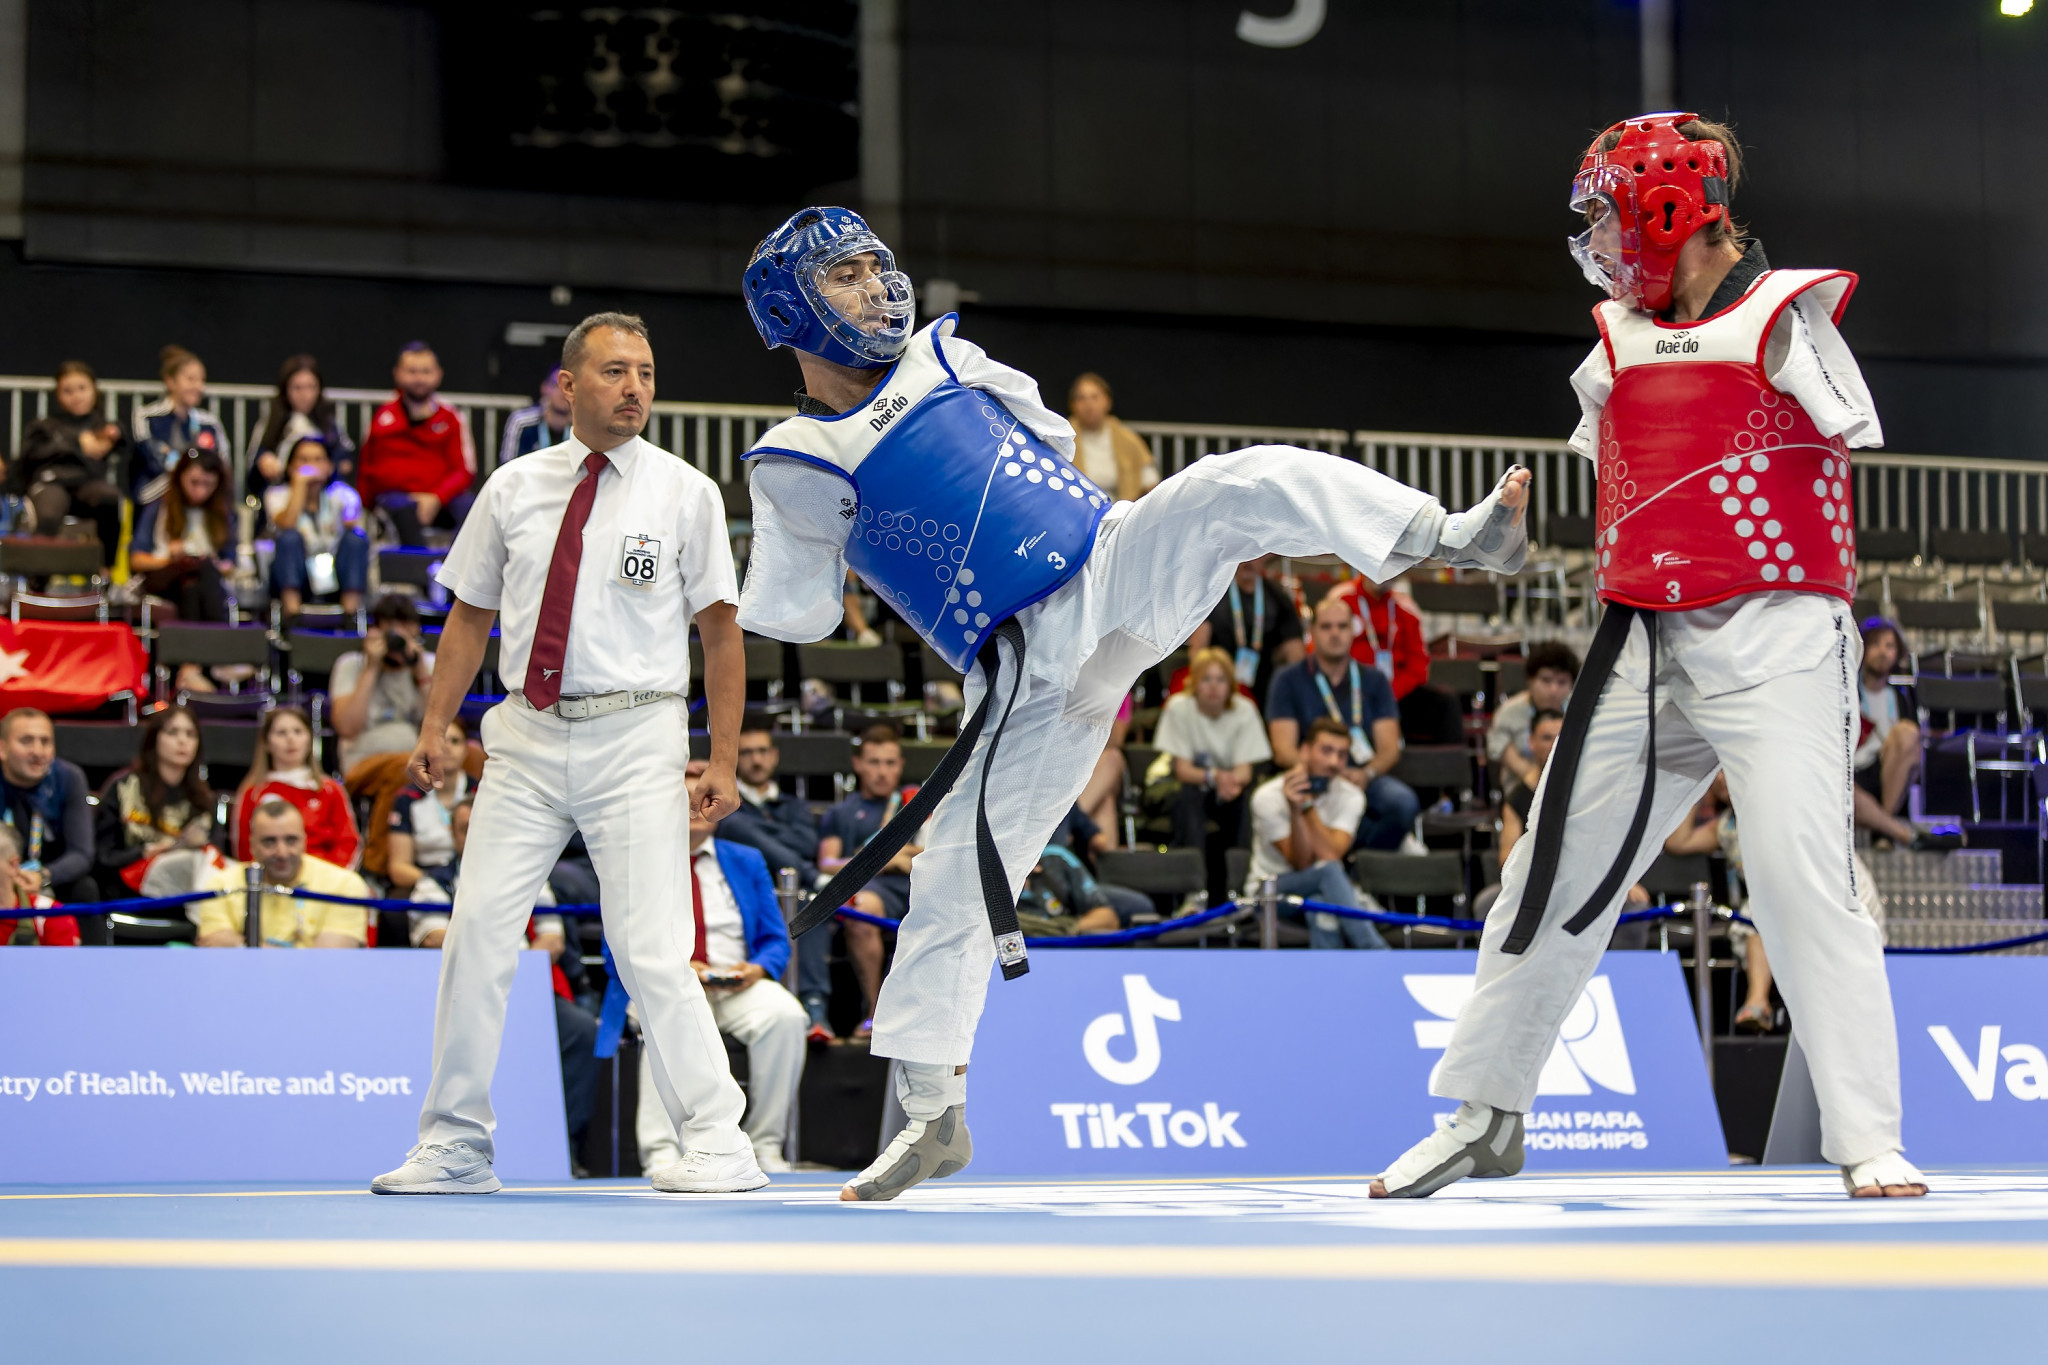 Fans are gripped by one of many matches on the penultimate day of Para taekwondo action ©EPC